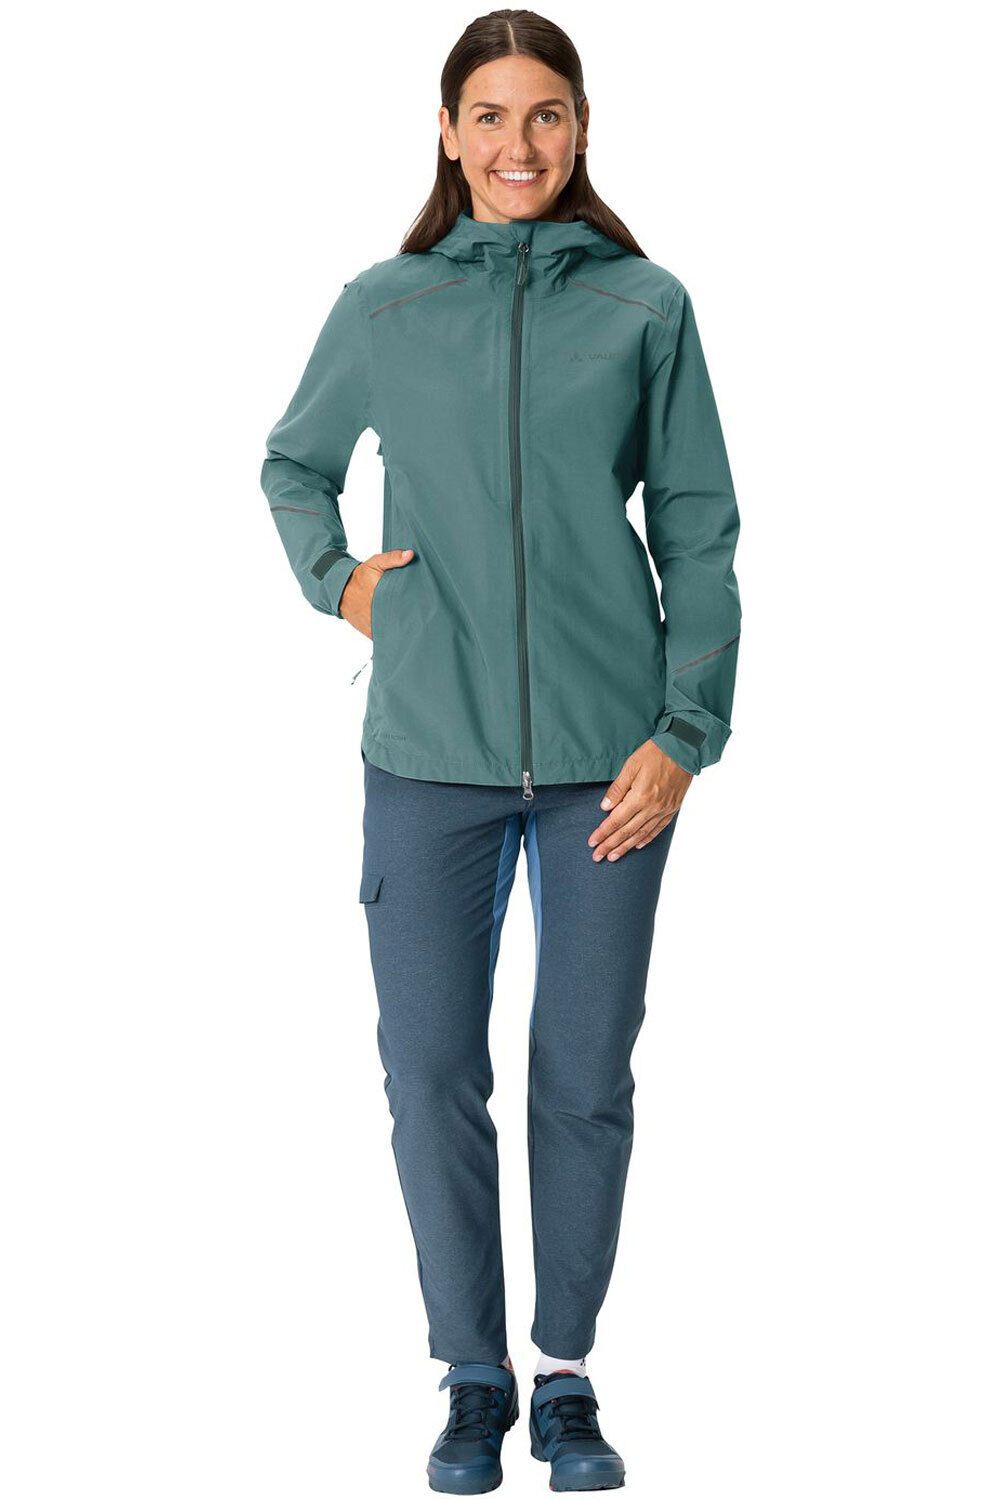 Vaude chaqueta impermeable ciclismo mujer Women's Yaras Jacket IV 04